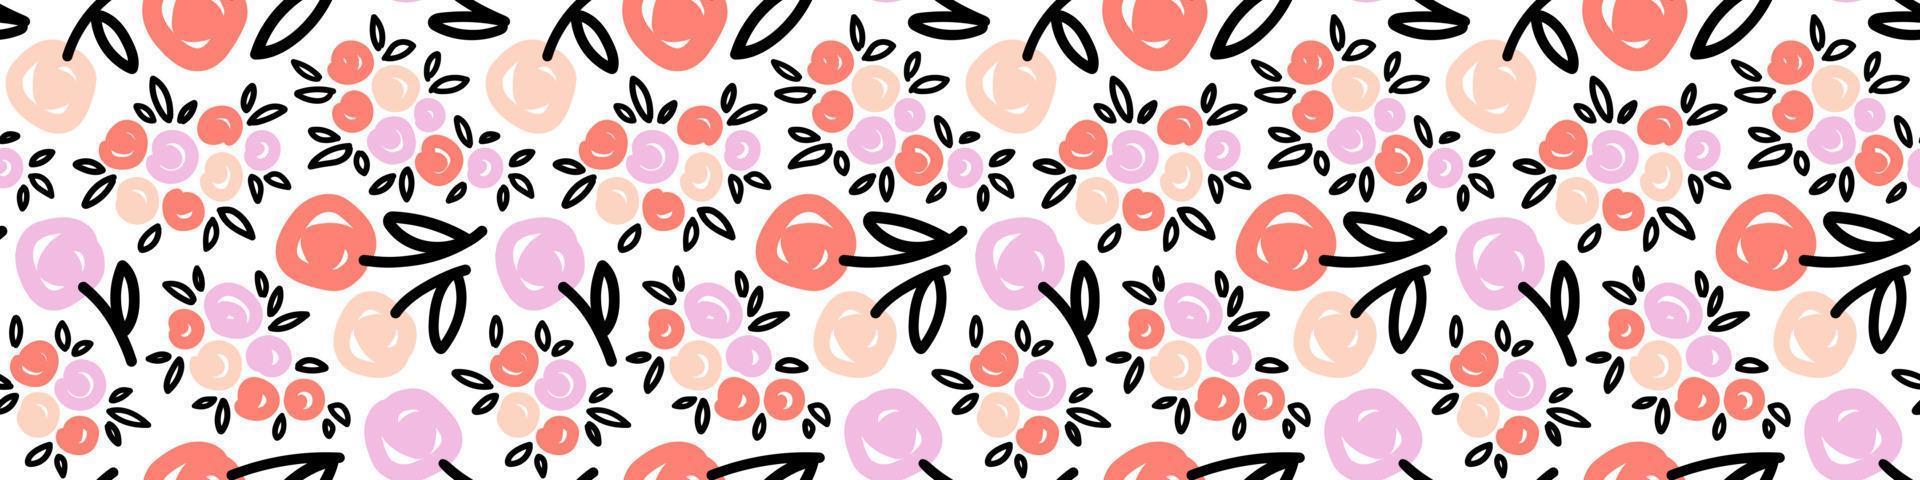 Hand drawn seamless Pattern with big and small Flowers for textile, wallpaper, greeting, wrapping, package. Stylized roses background. Simple Spring or Summer texture. Vector illustration.